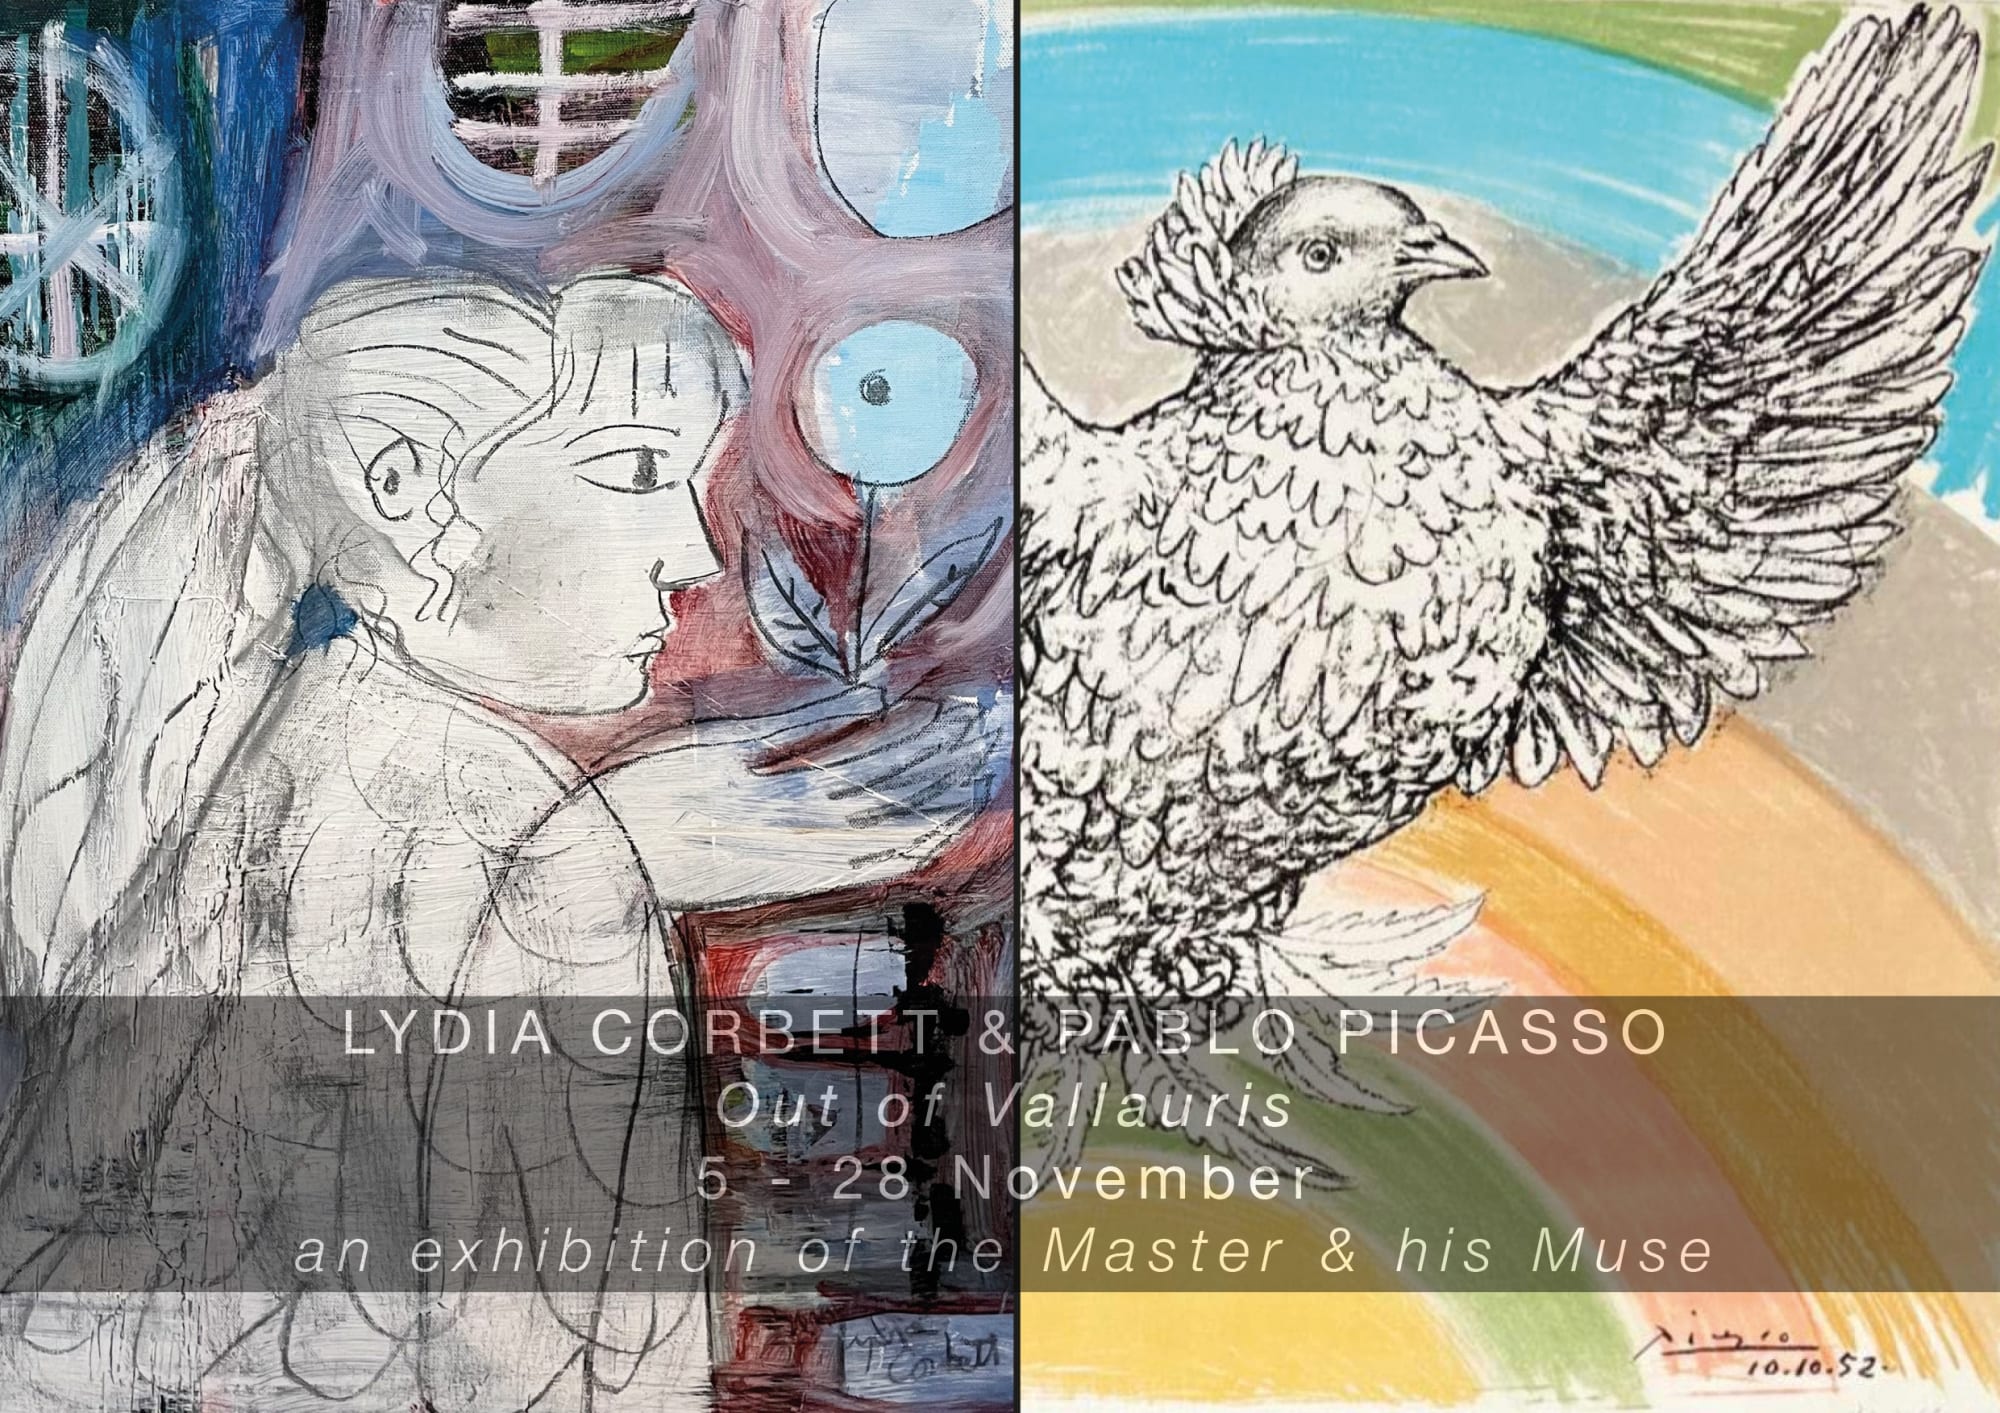 Lydia Corbett & Pablo Picasso: Out of Vallauris